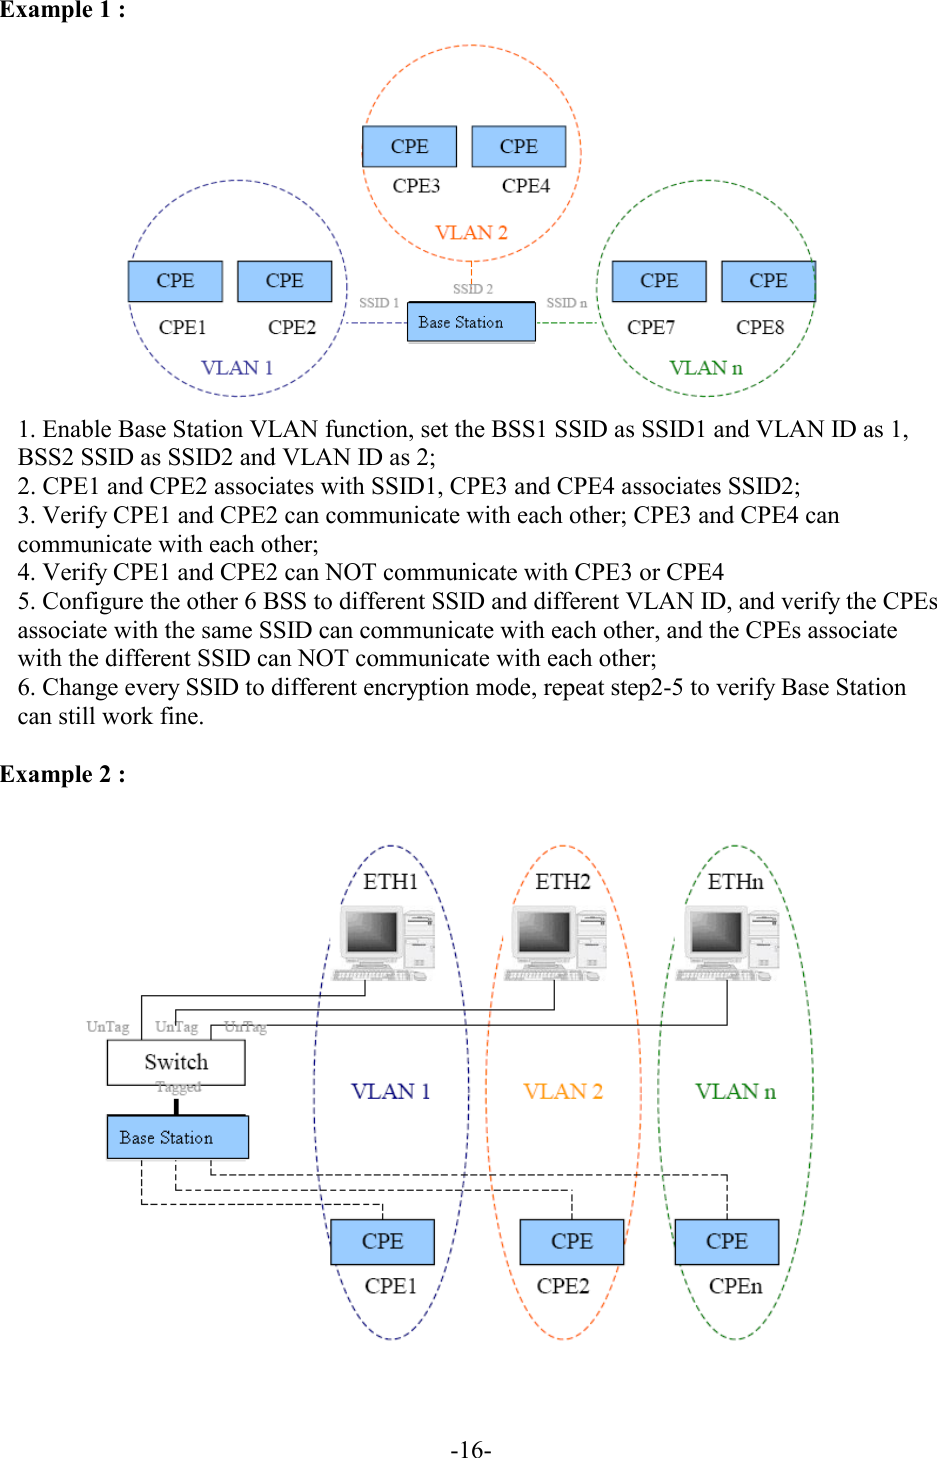  -16-  Example 1 :    1. Enable Base Station VLAN function, set the BSS1 SSID as SSID1 and VLAN ID as 1,     BSS2 SSID as SSID2 and VLAN ID as 2;     2. CPE1 and CPE2 associates with SSID1, CPE3 and CPE4 associates SSID2;     3. Verify CPE1 and CPE2 can communicate with each other; CPE3 and CPE4 can communicate with each other;     4. Verify CPE1 and CPE2 can NOT communicate with CPE3 or CPE4     5. Configure the other 6 BSS to different SSID and different VLAN ID, and verify the CPEs associate with the same SSID can communicate with each other, and the CPEs associate with the different SSID can NOT communicate with each other;     6. Change every SSID to different encryption mode, repeat step2-5 to verify Base Station can still work fine.    Example 2 :    